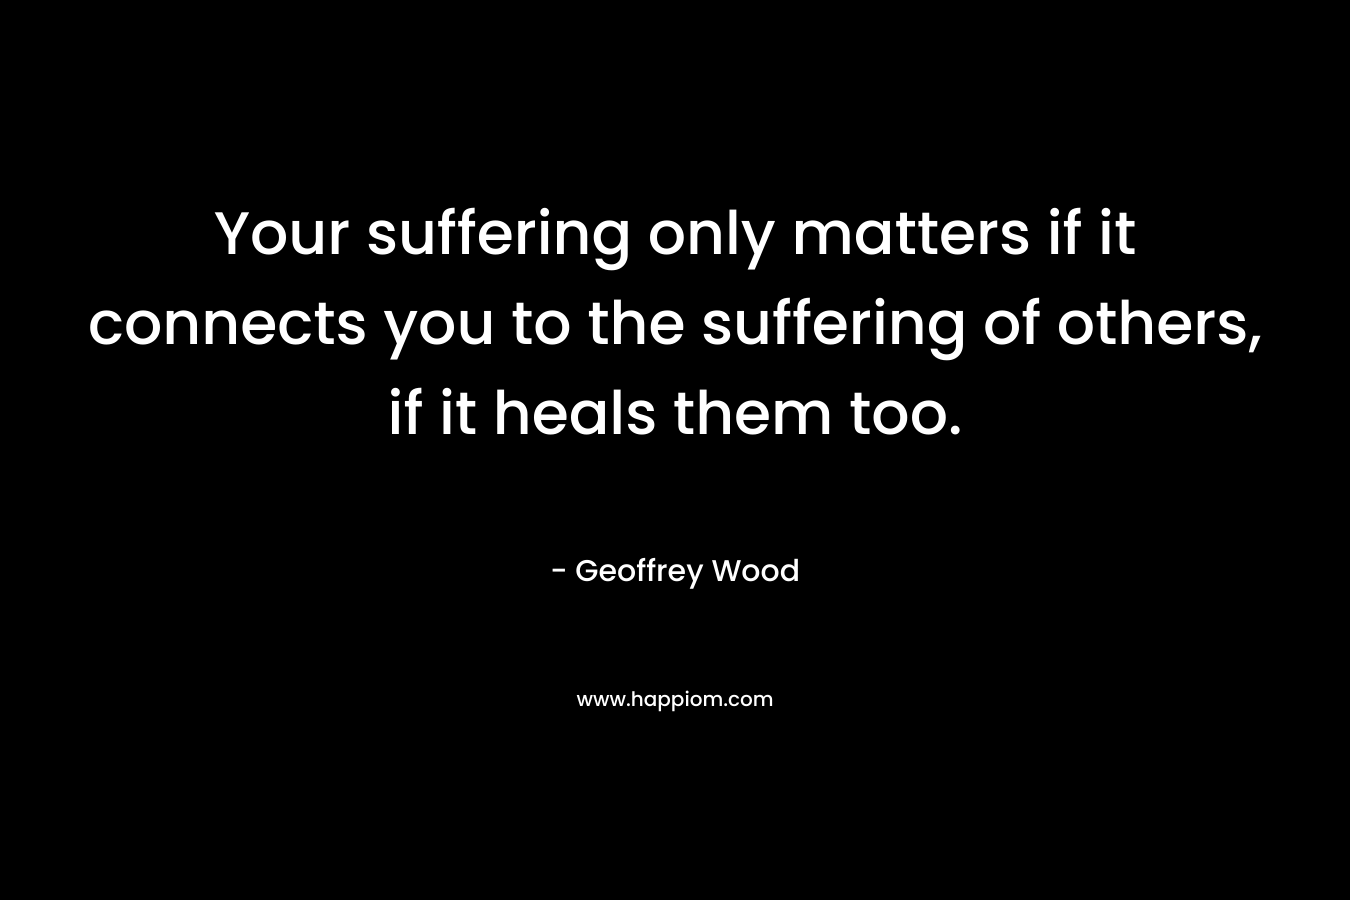 Your suffering only matters if it connects you to the suffering of others, if it heals them too. – Geoffrey Wood